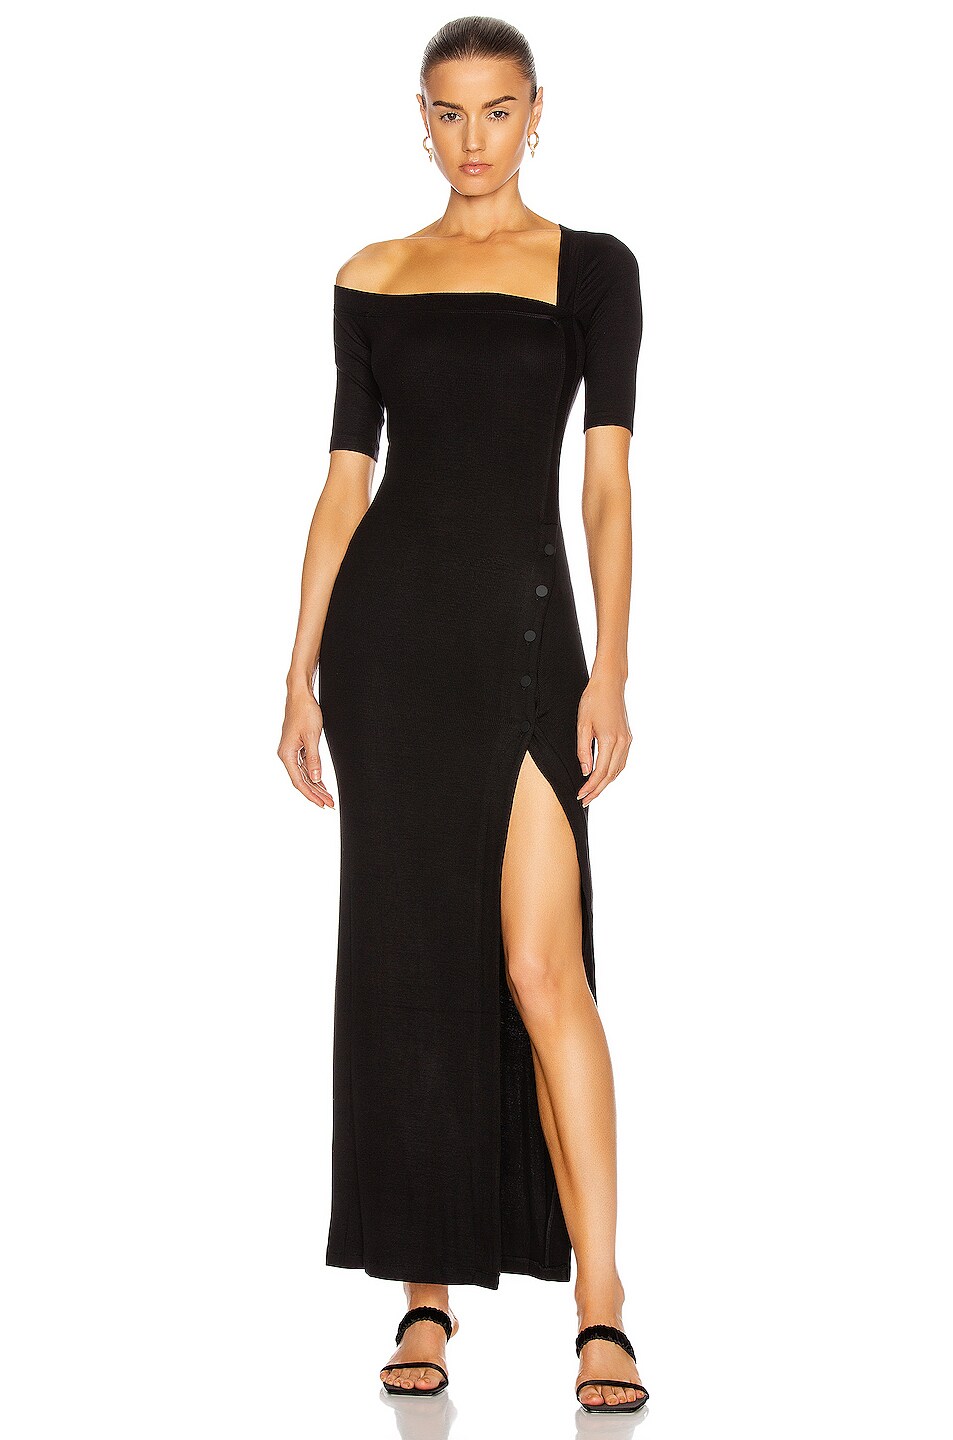 Image 1 of ALIX NYC Packard Dress in Black